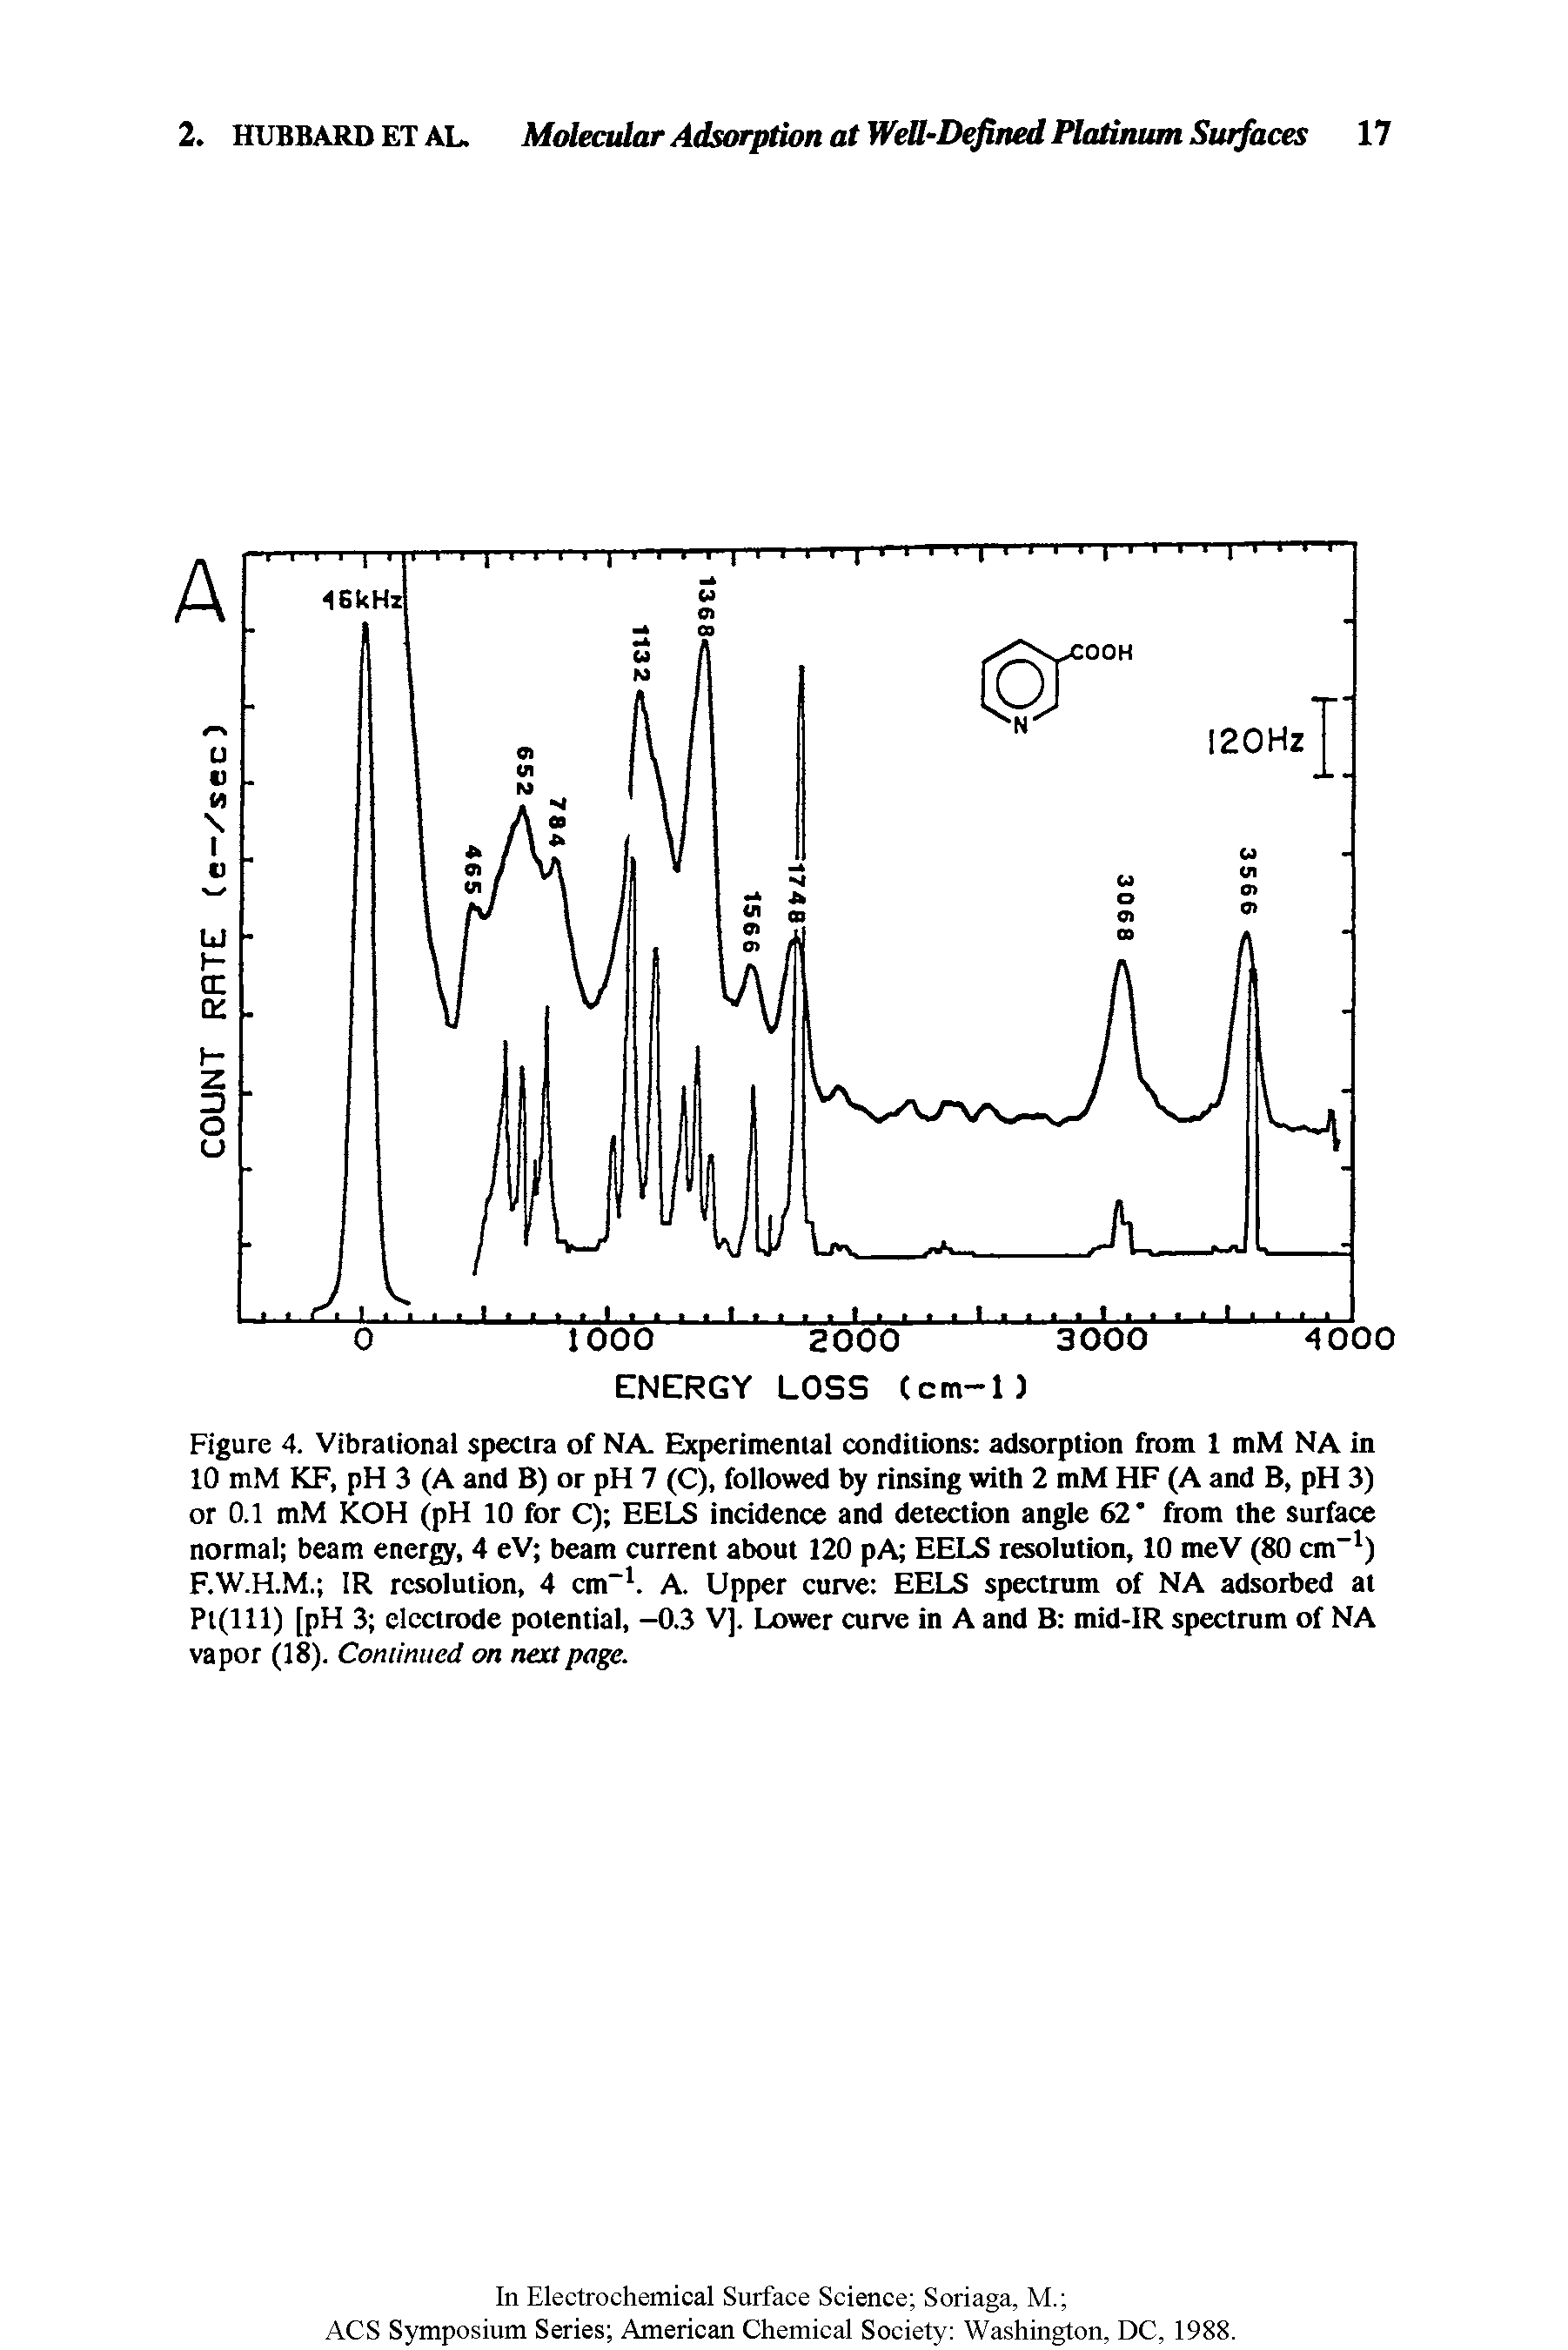 Figure 4. Vibrational spectra of NA. Experimental conditions adsorption from 1 mM NA in 10 mM KF, pH 3 (A and B) or pH 7 (C), followed by rinsing with 2 mM HF (A and B, pH 3) or 0.1 mM KOH (pH 10 for C) EELS incidence and detection angle 62 from the surface normal beam energy, 4 eV beam current about 120 pA EELS resolution, 10 meV (80 cm-1) F.W.H.M. IR resolution, 4 cm-1. A. Upper curve EELS spectrum of NA adsorbed at Pl(lll) [pH 3 electrode potential, -0.3 V]. Lower curve in A and B mid-IR spectrum of NA vapor (18). Continued on next page.